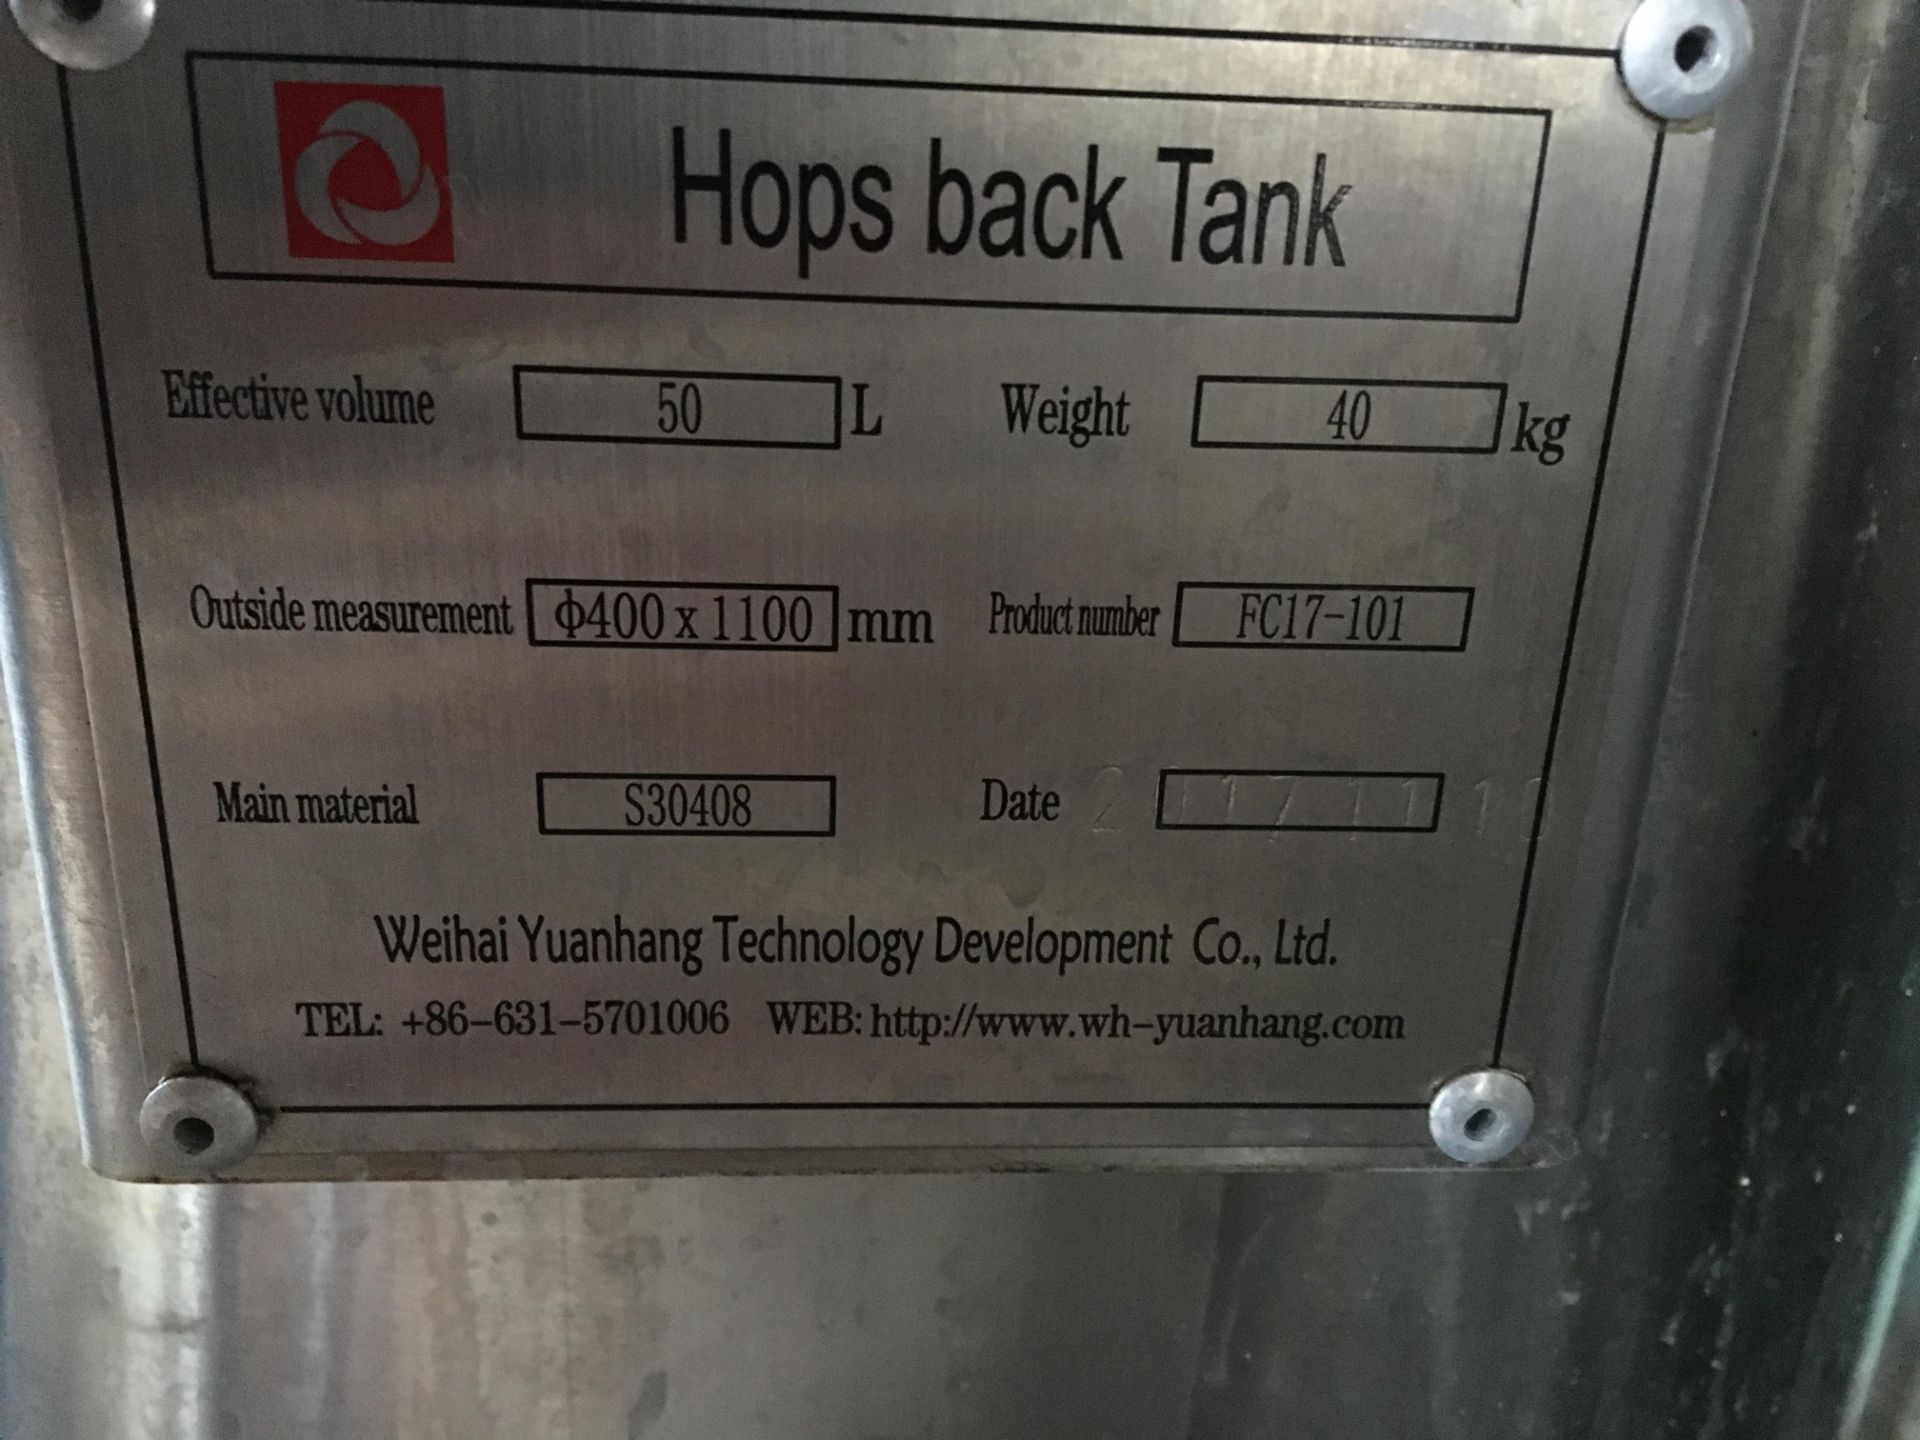 50-L Minnetonka Hops Back Tank, Stainless Steel; Vessel That a brewing vat into which the wort is - Image 5 of 6